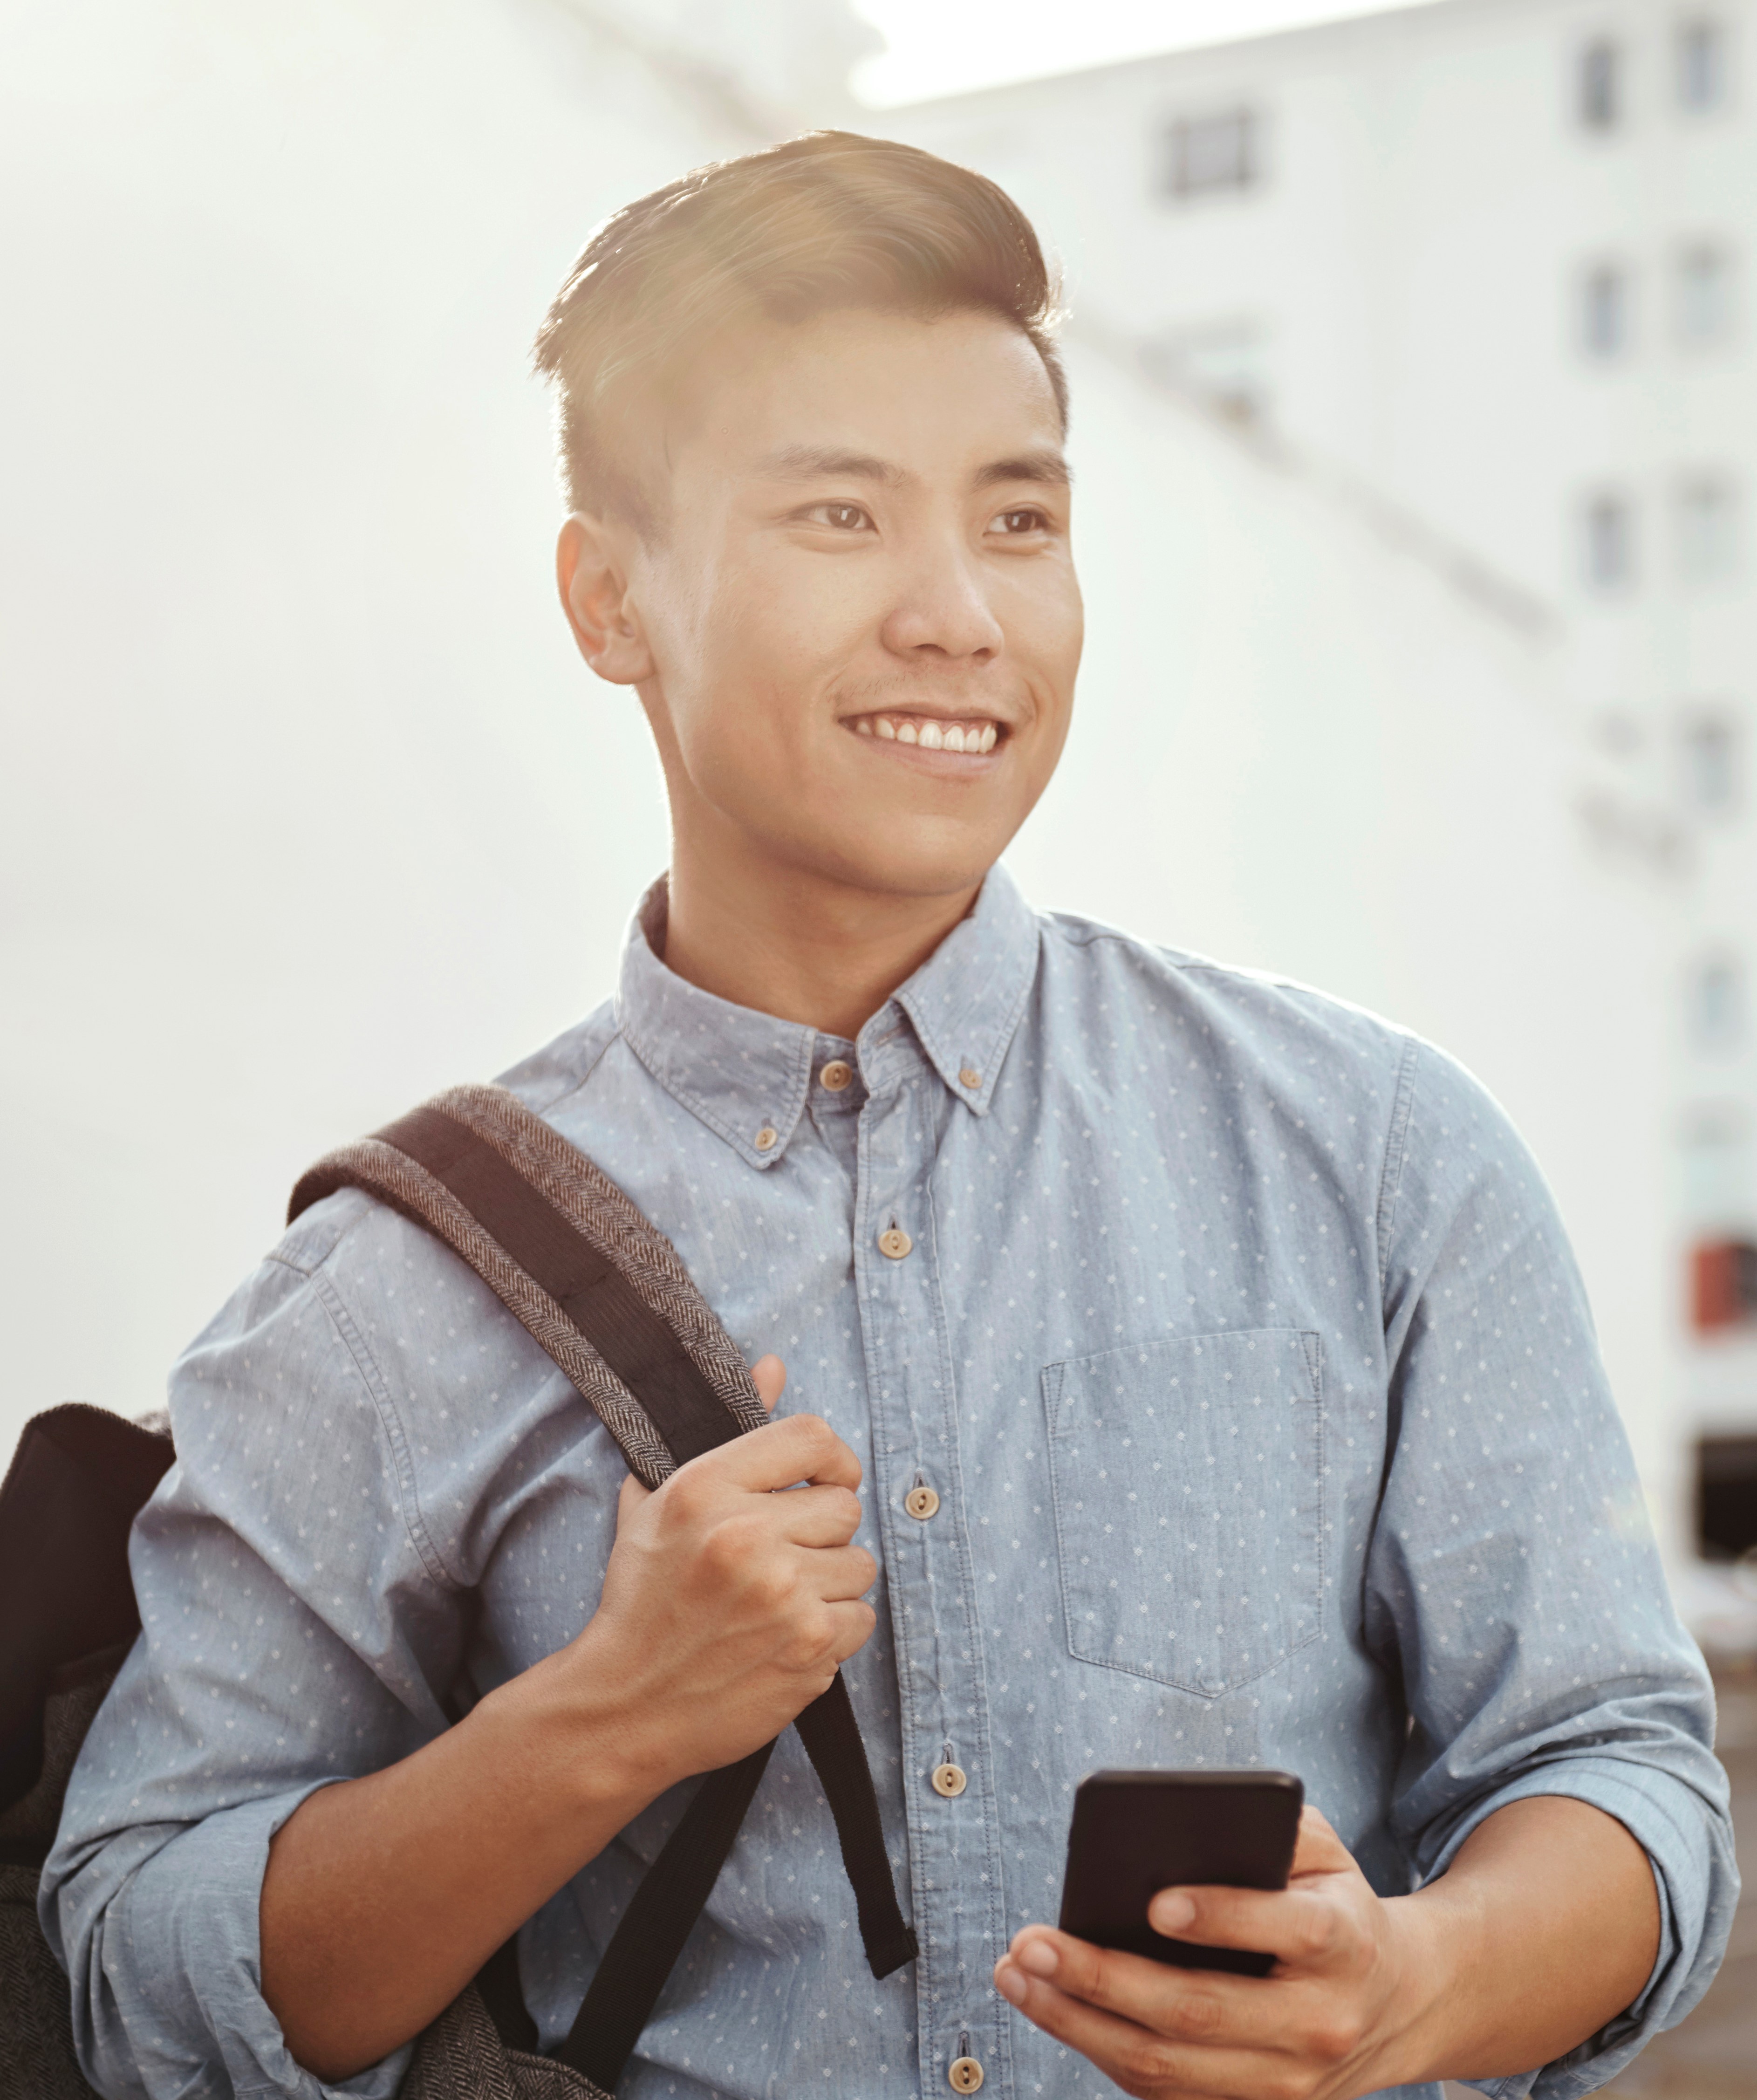 Male student smiling with phone in hand